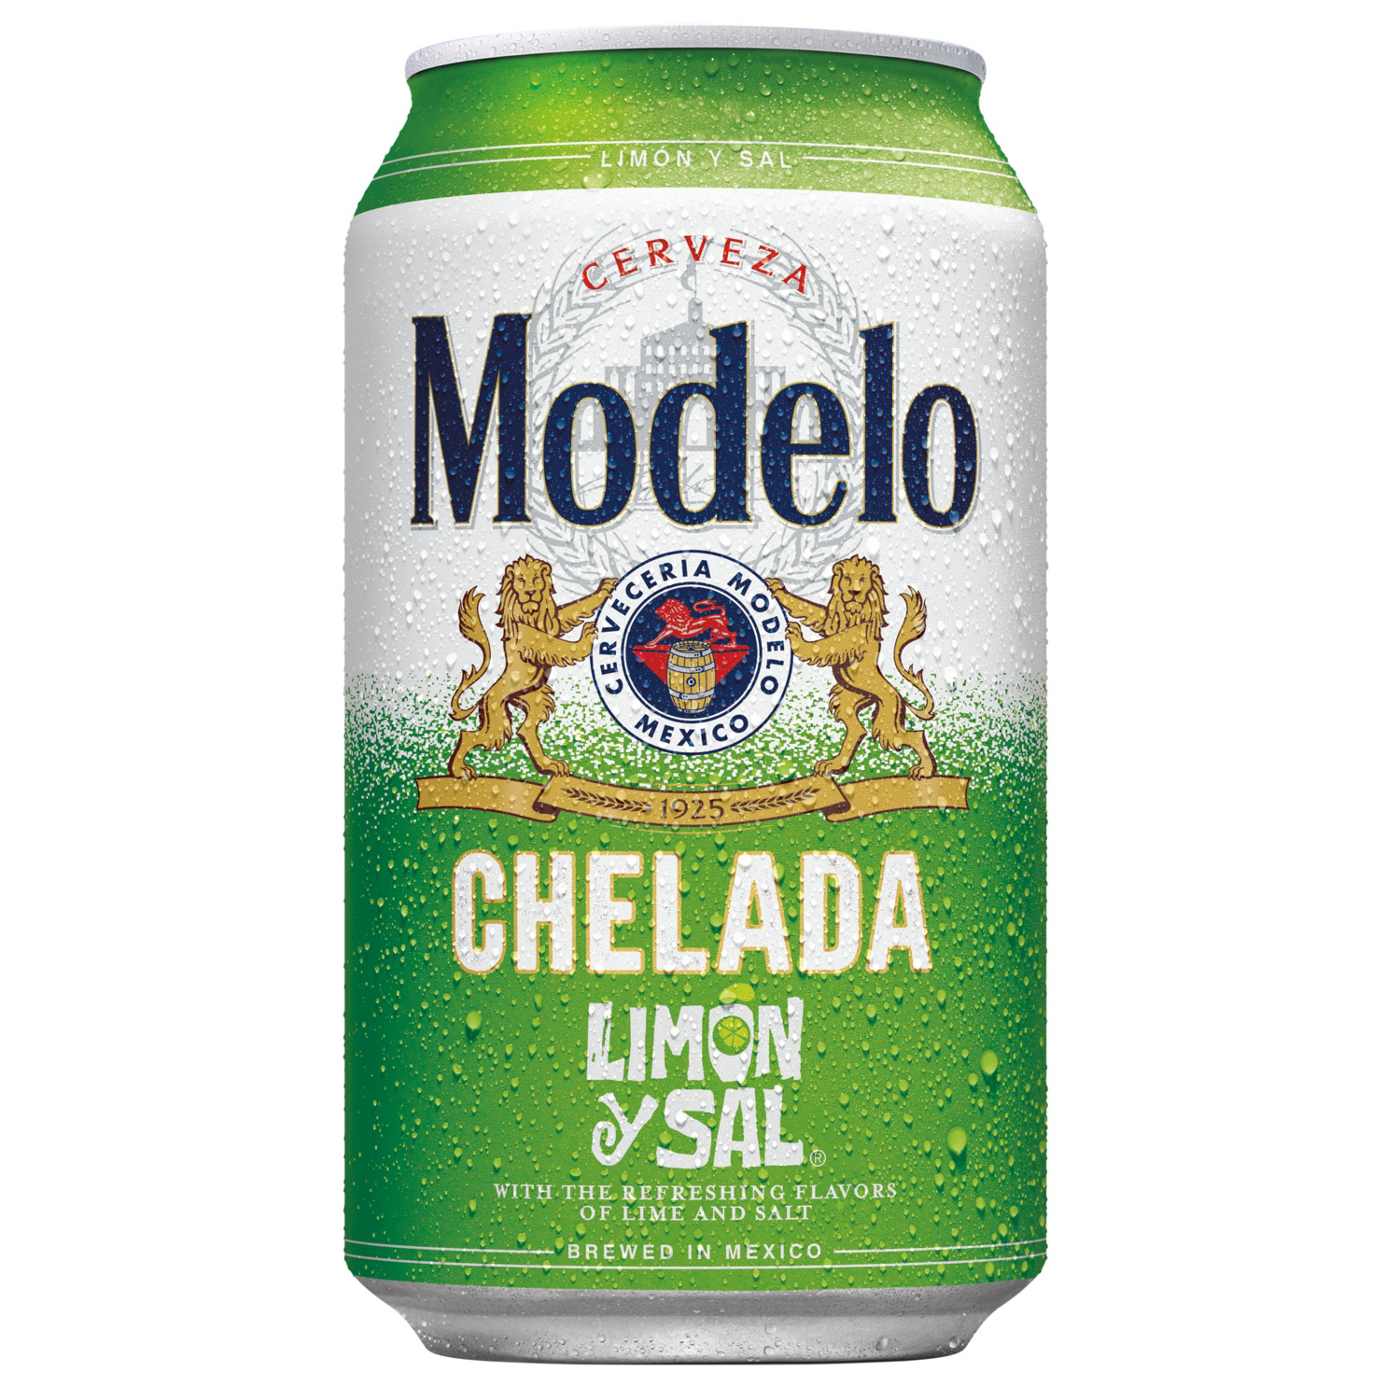 Modelo Chelada Limon y Sal Mexican Import Flavored Beer 12 oz Cans, 12 pk; image 2 of 9